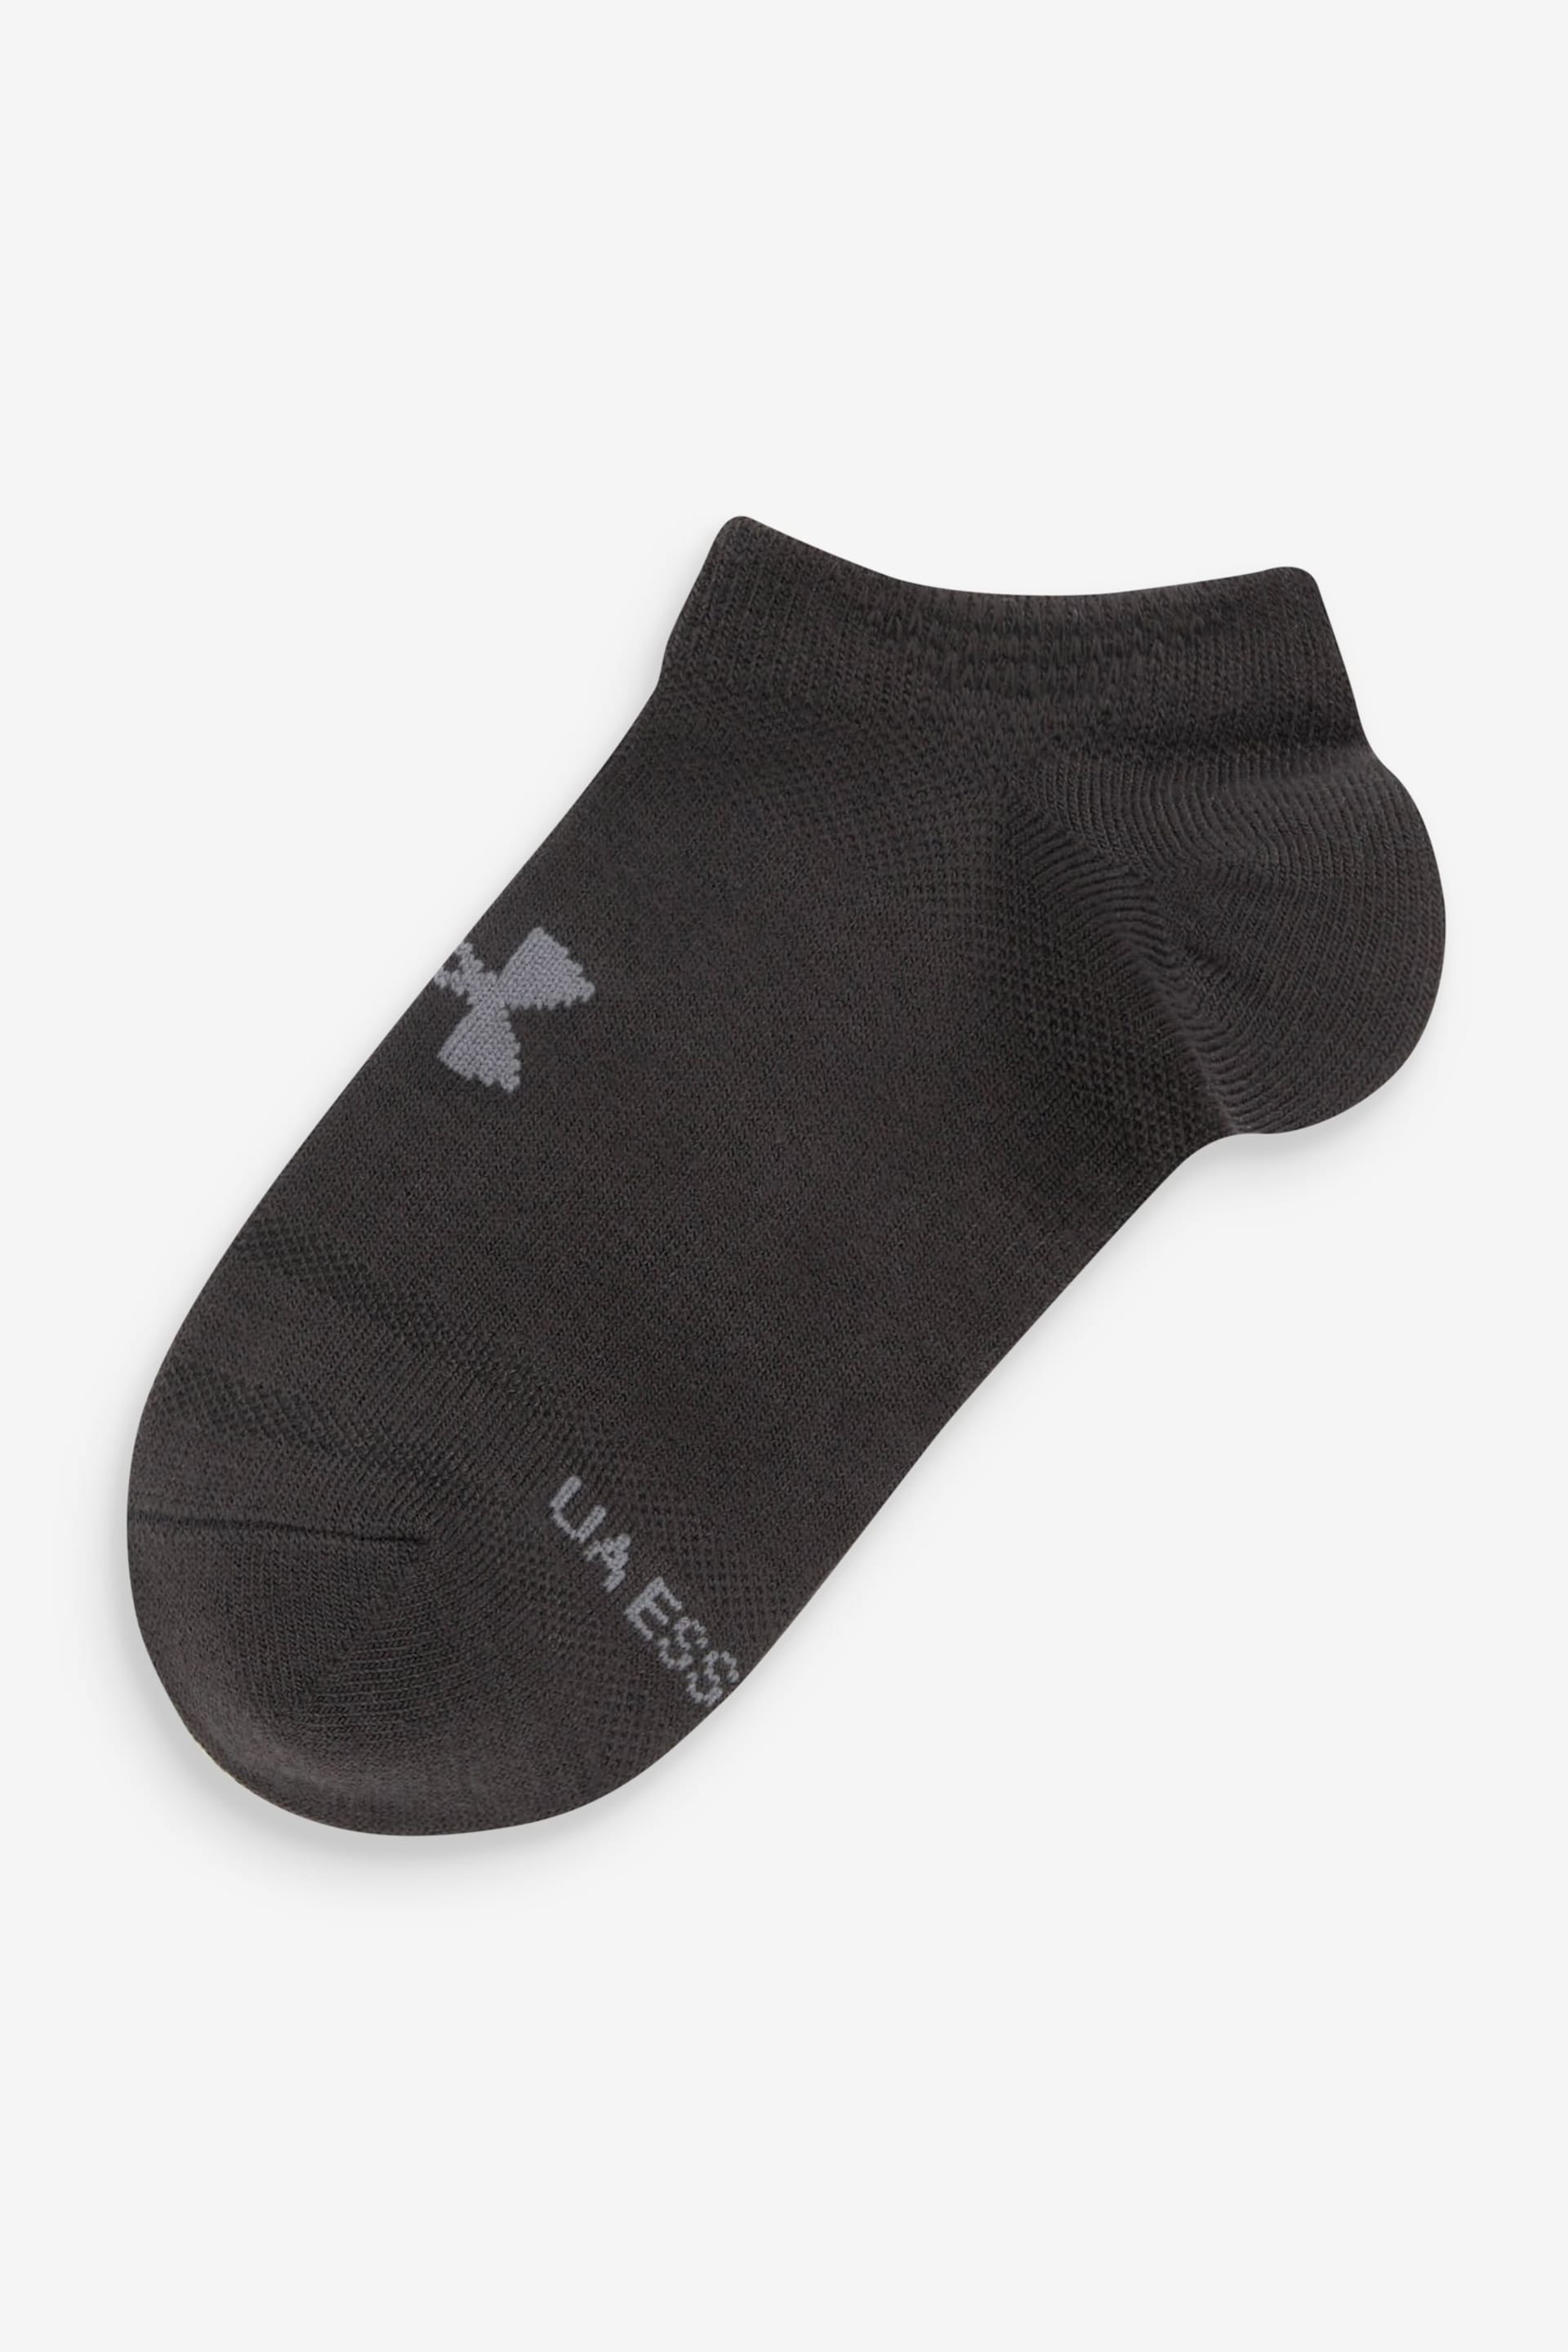 Under Armour Essential No Show Black Socks 6 Pack - Image 4 of 7